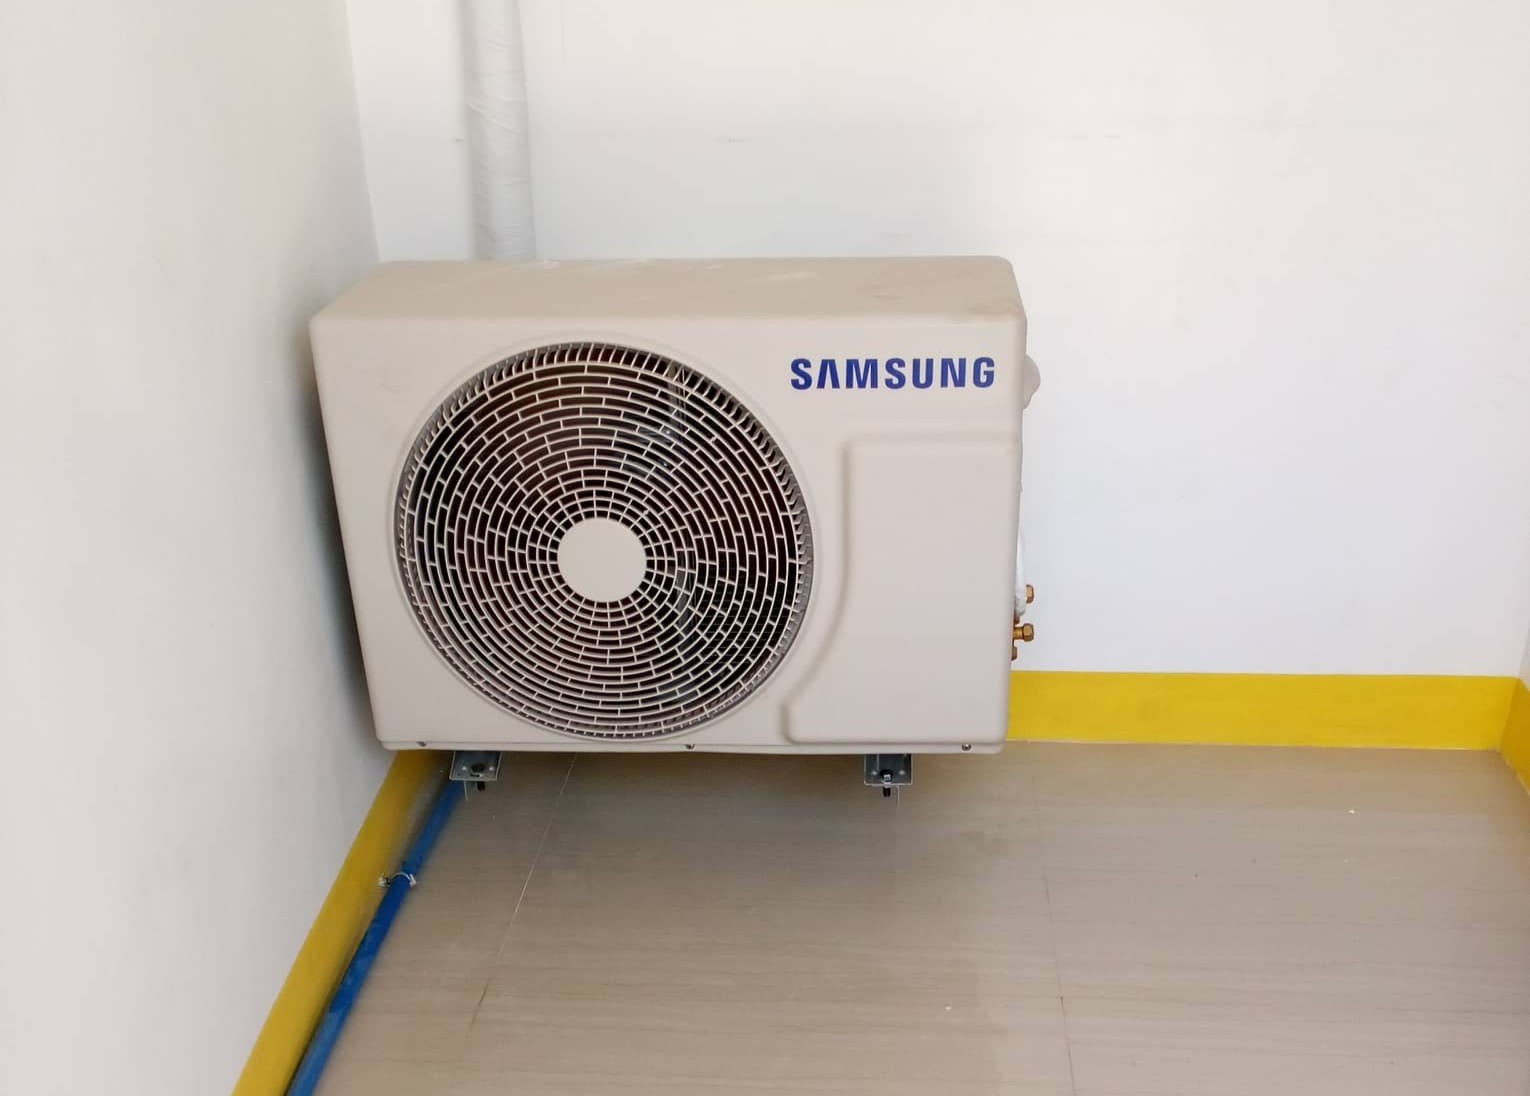 How To Fix The Error Code E206 For Samsung Air Conditioner